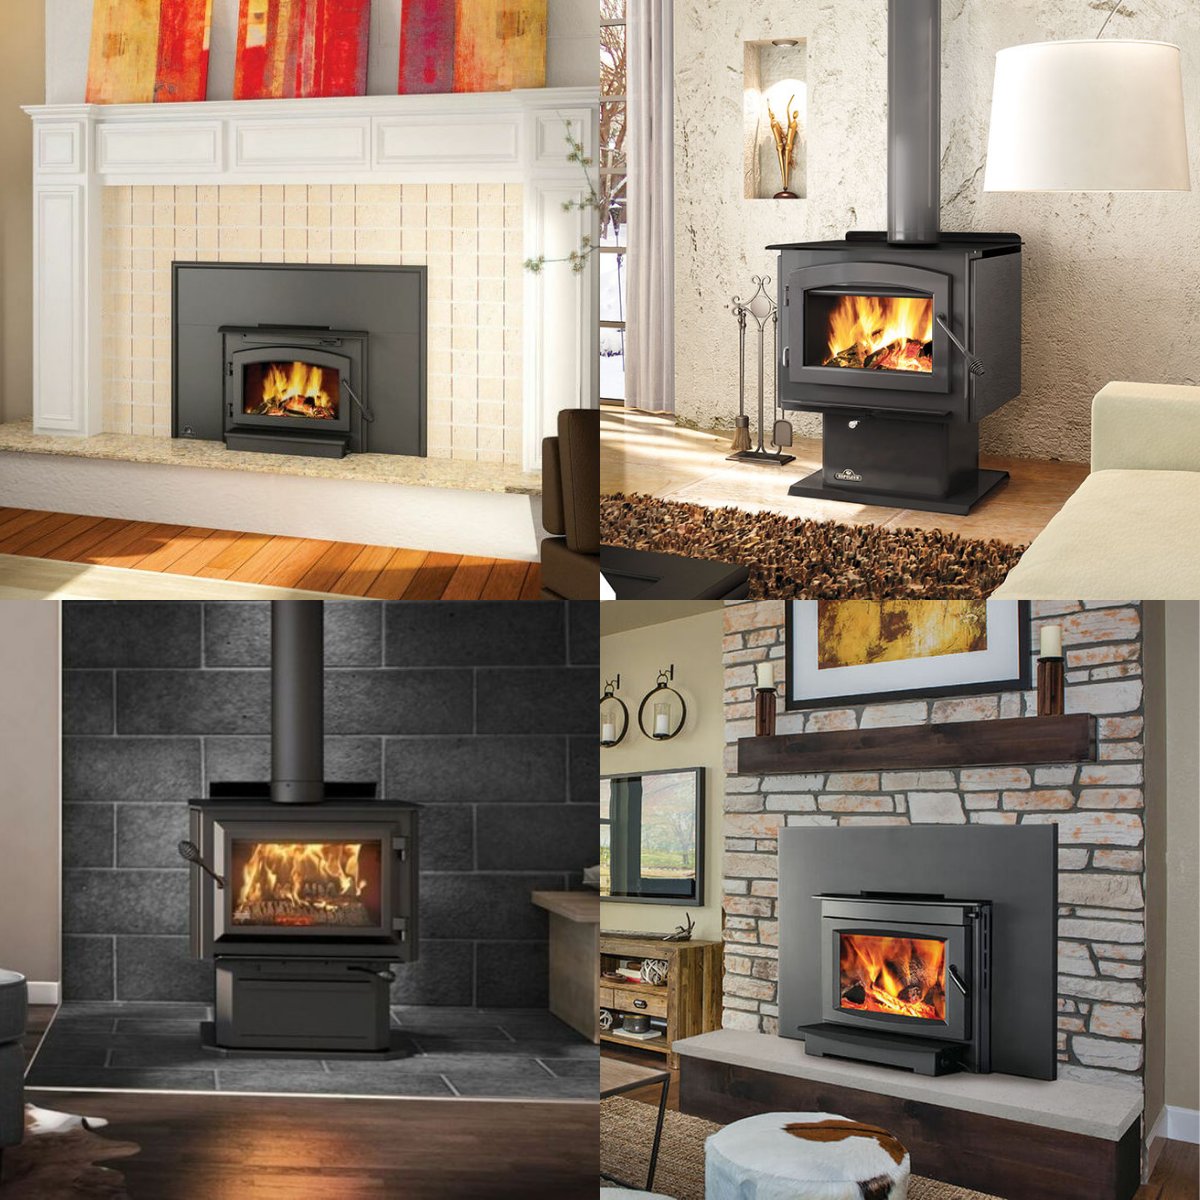 Wood Stoves & Inserts